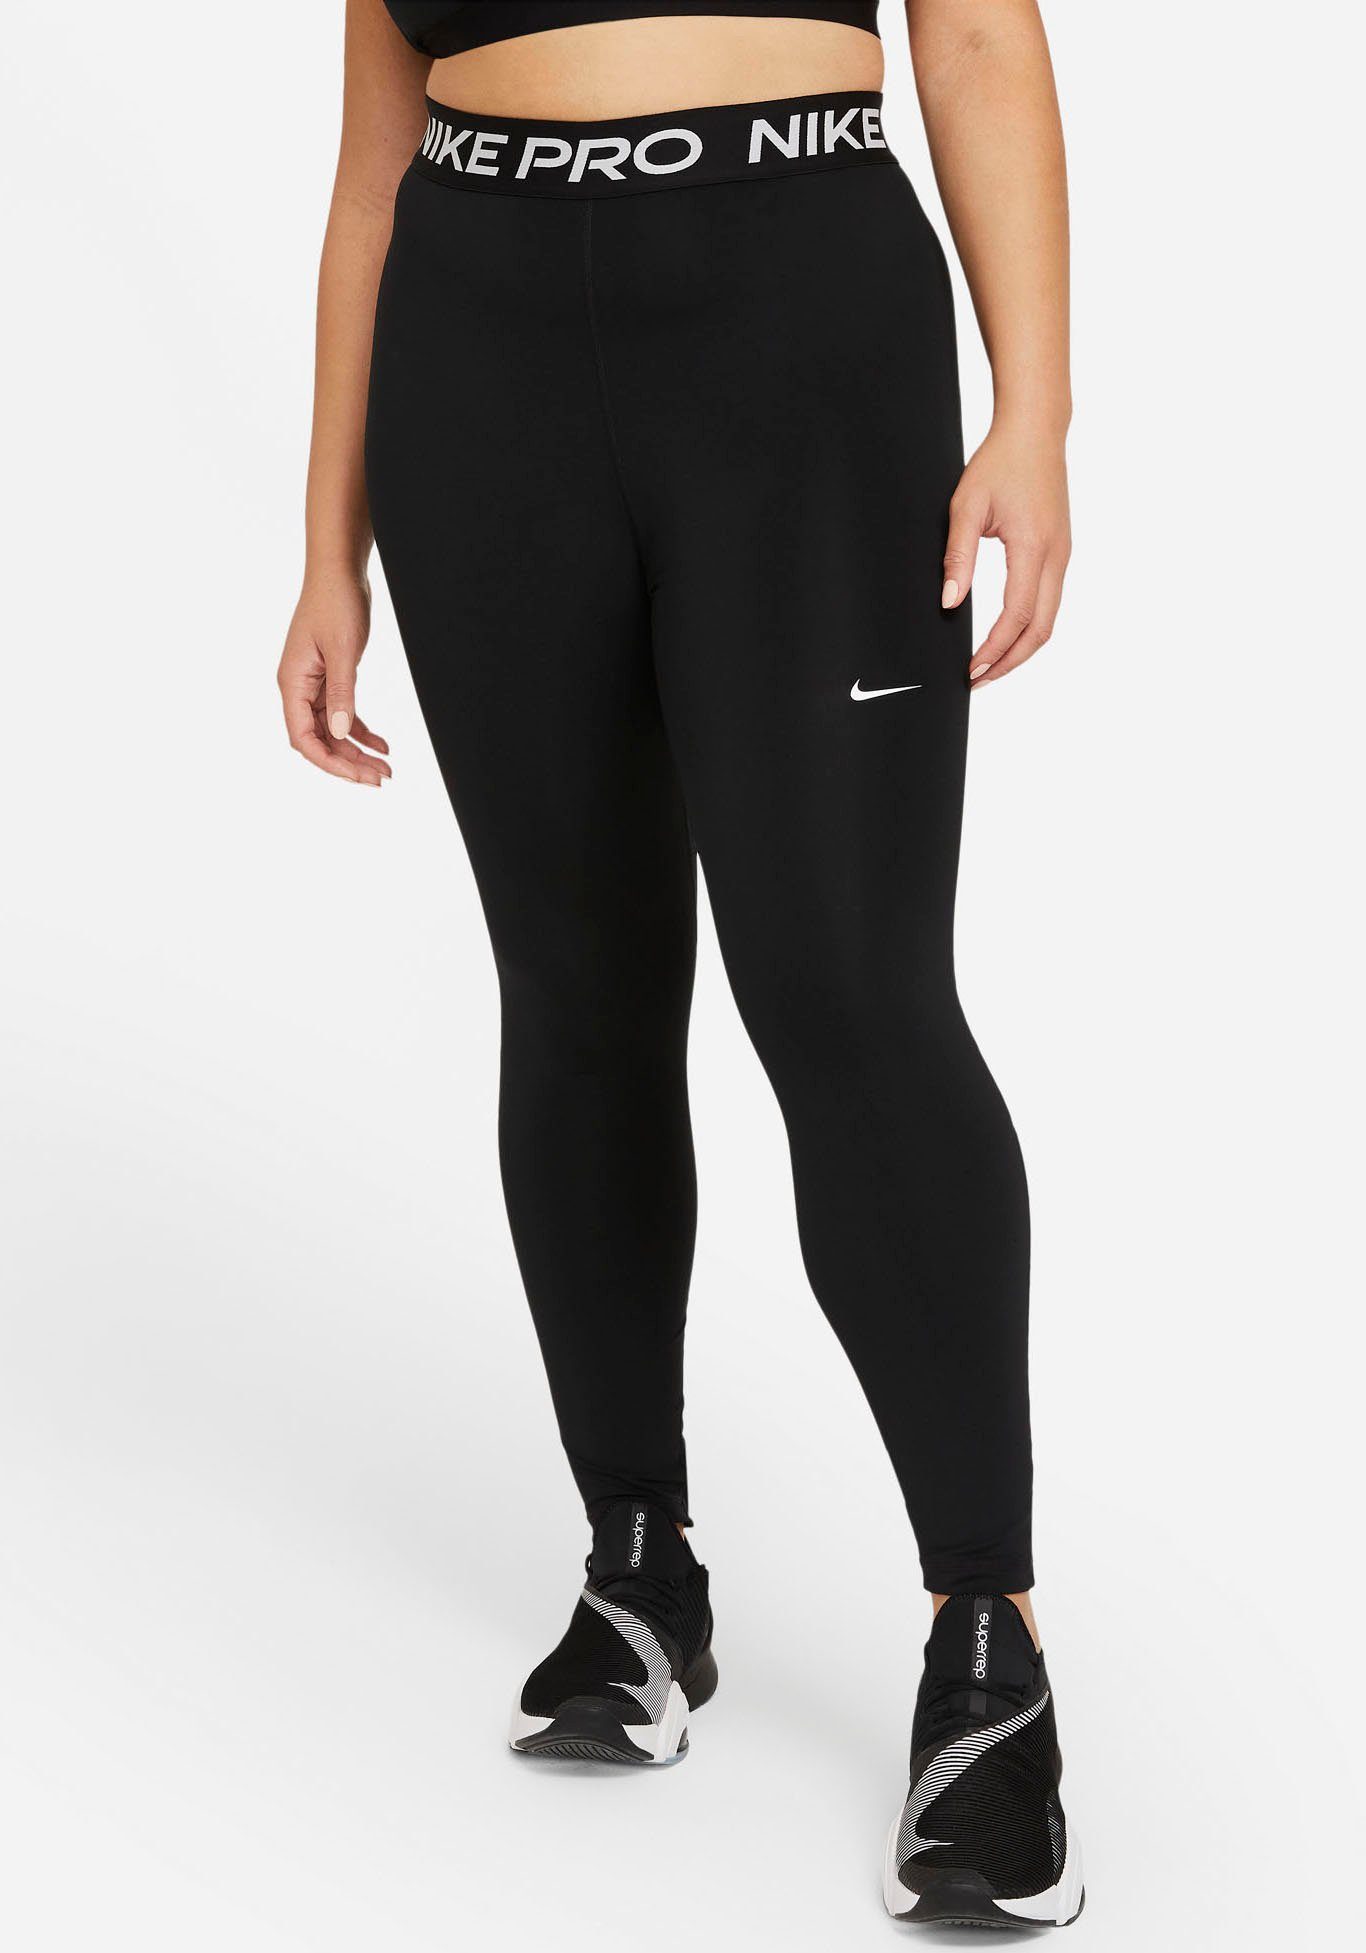 Nike Funktionstights Nike Pro 365 Women's Tights Plus Size